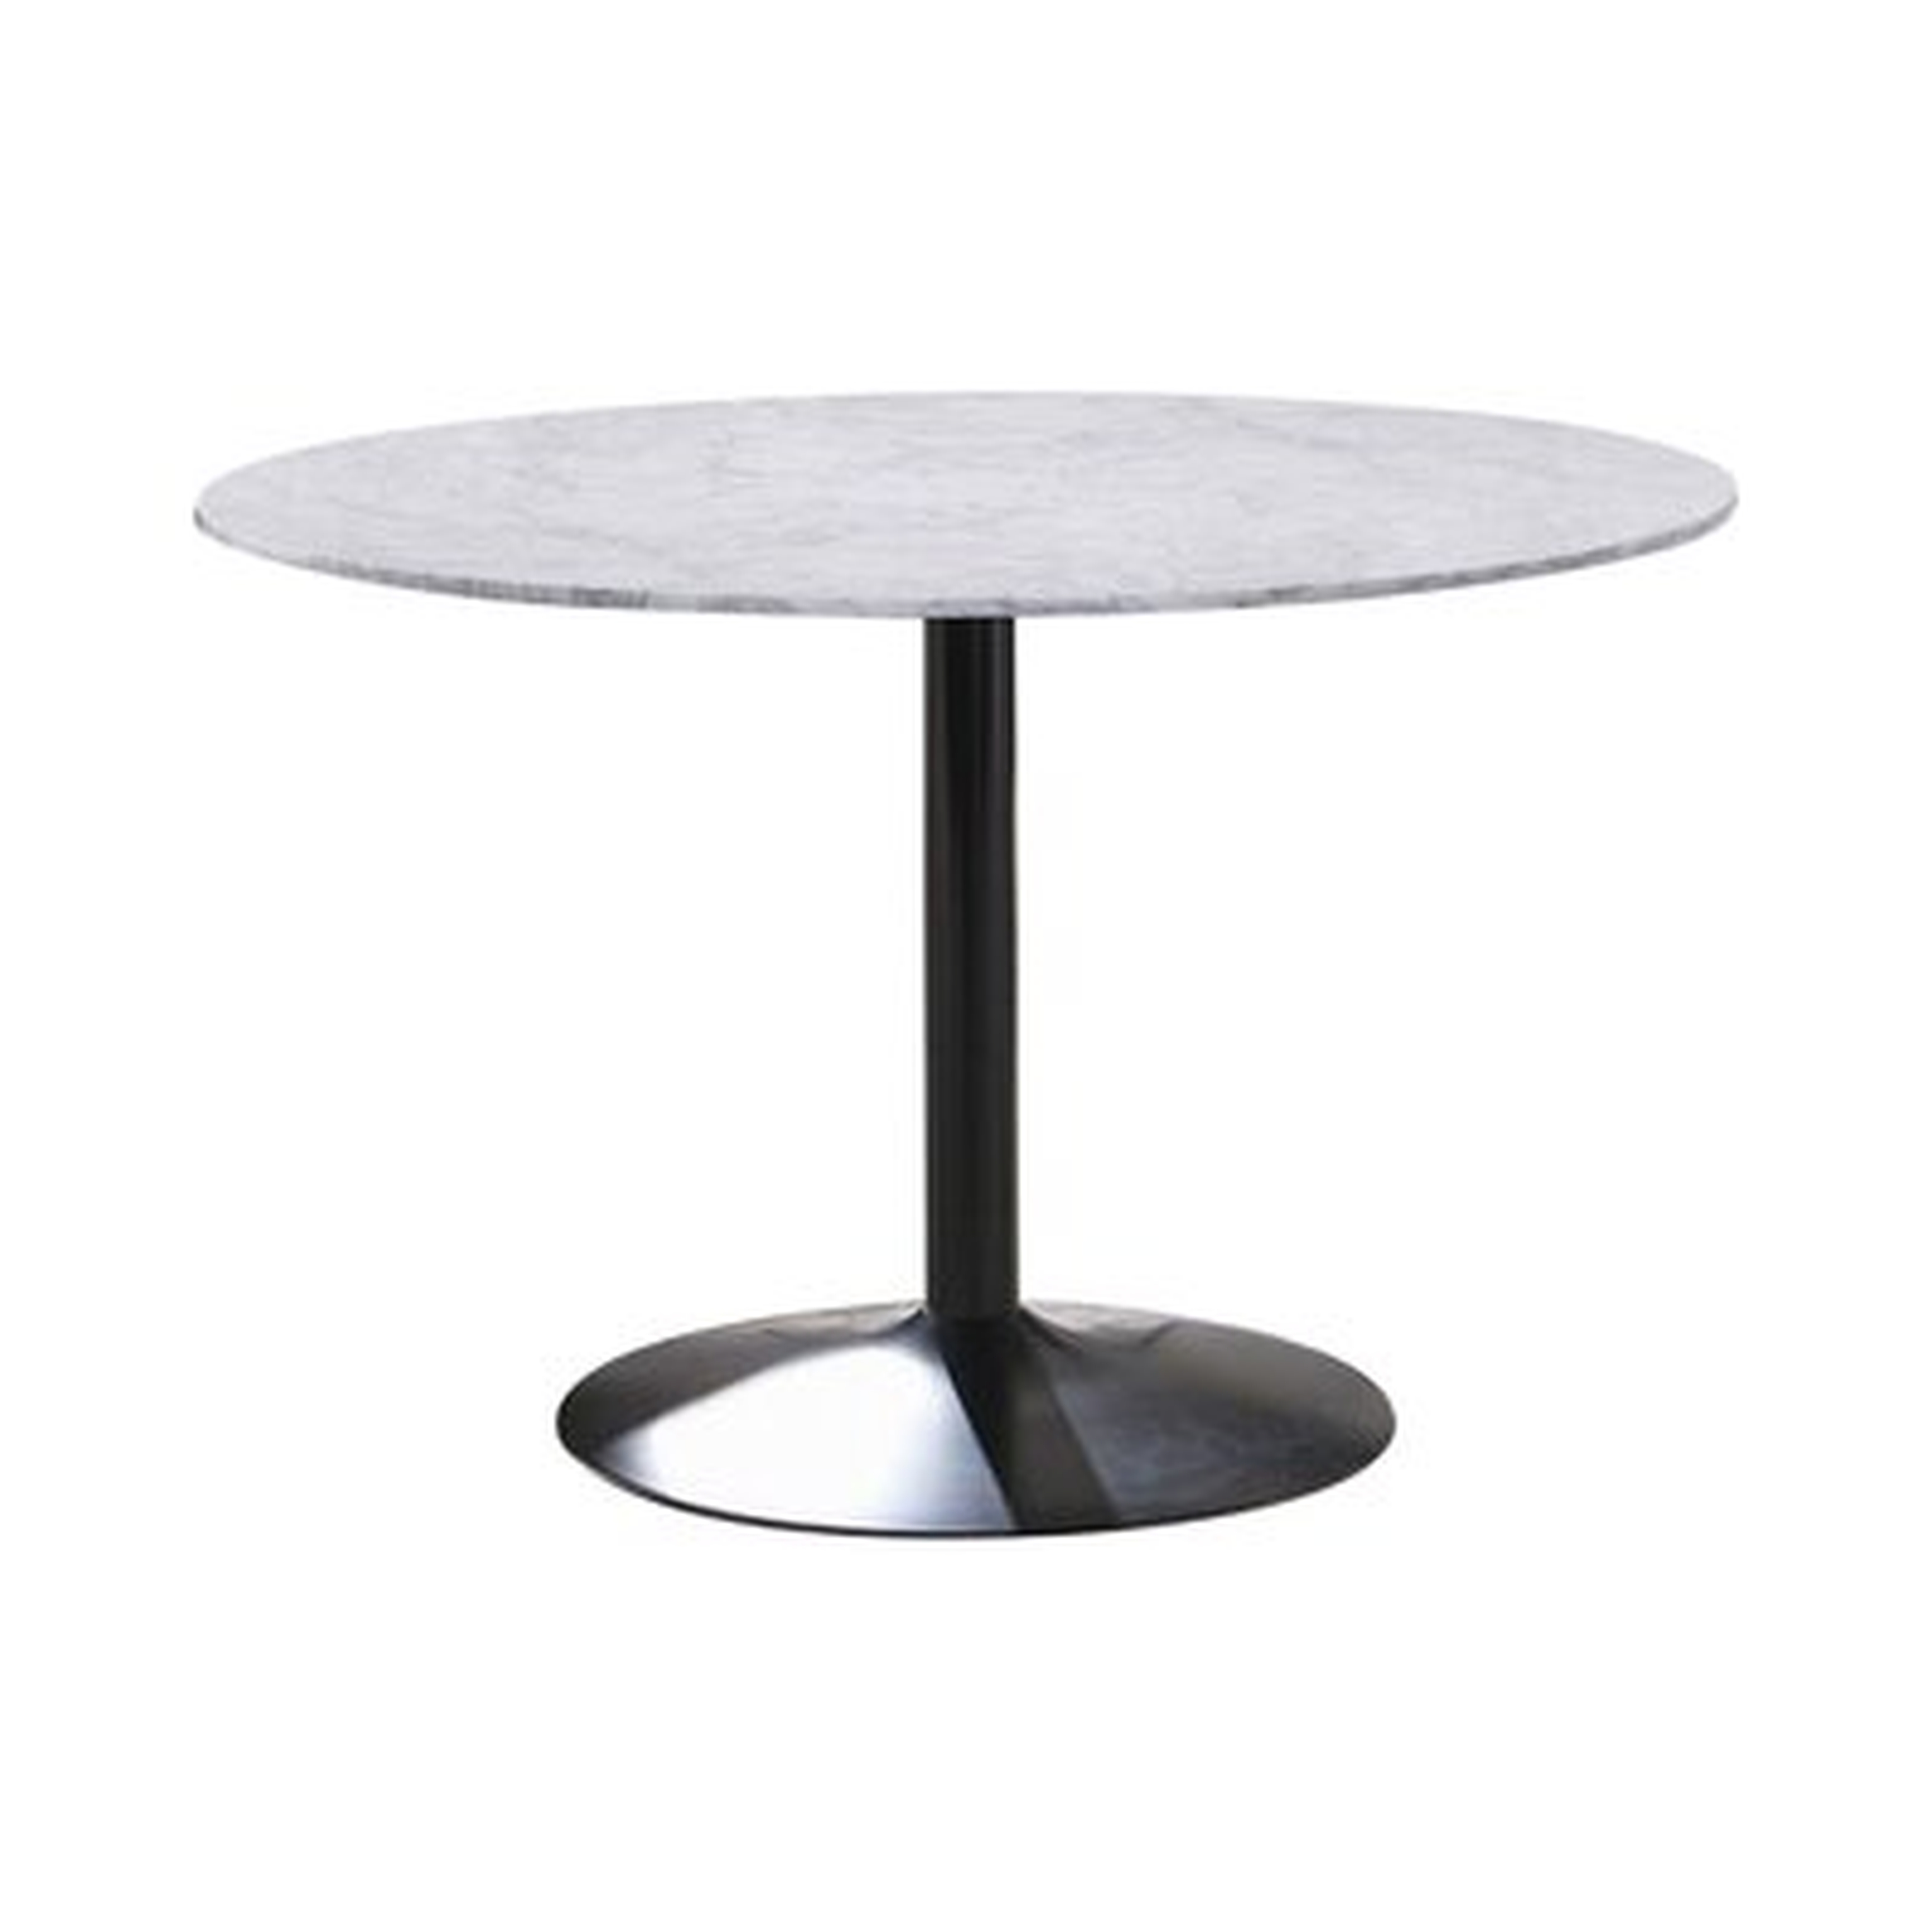 Dining Table With Marble Top And Metal Flared Base, White And Black - Wayfair